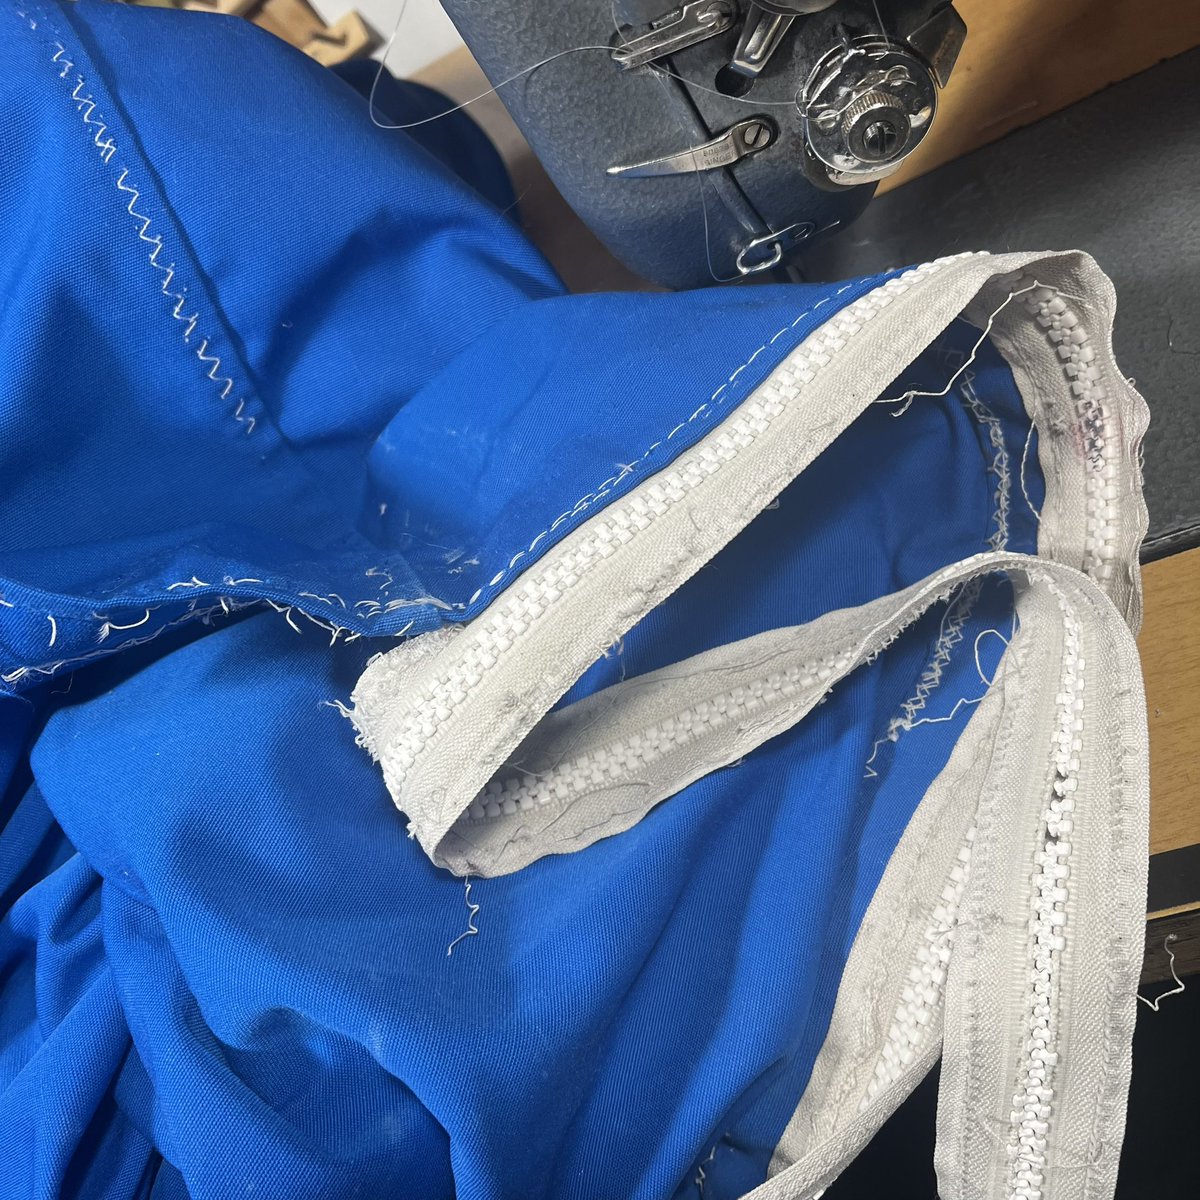 Good day to be reminded to fix that sail cover or Zippers on your Dodgers before your boat launch

Sun is harsh on zippers and they degrade. 

And the thread also breaks down if the maker didn’t use Sun resistant thread. 

#boatlaunch
#zippers
#boats
#sailcover
#sails